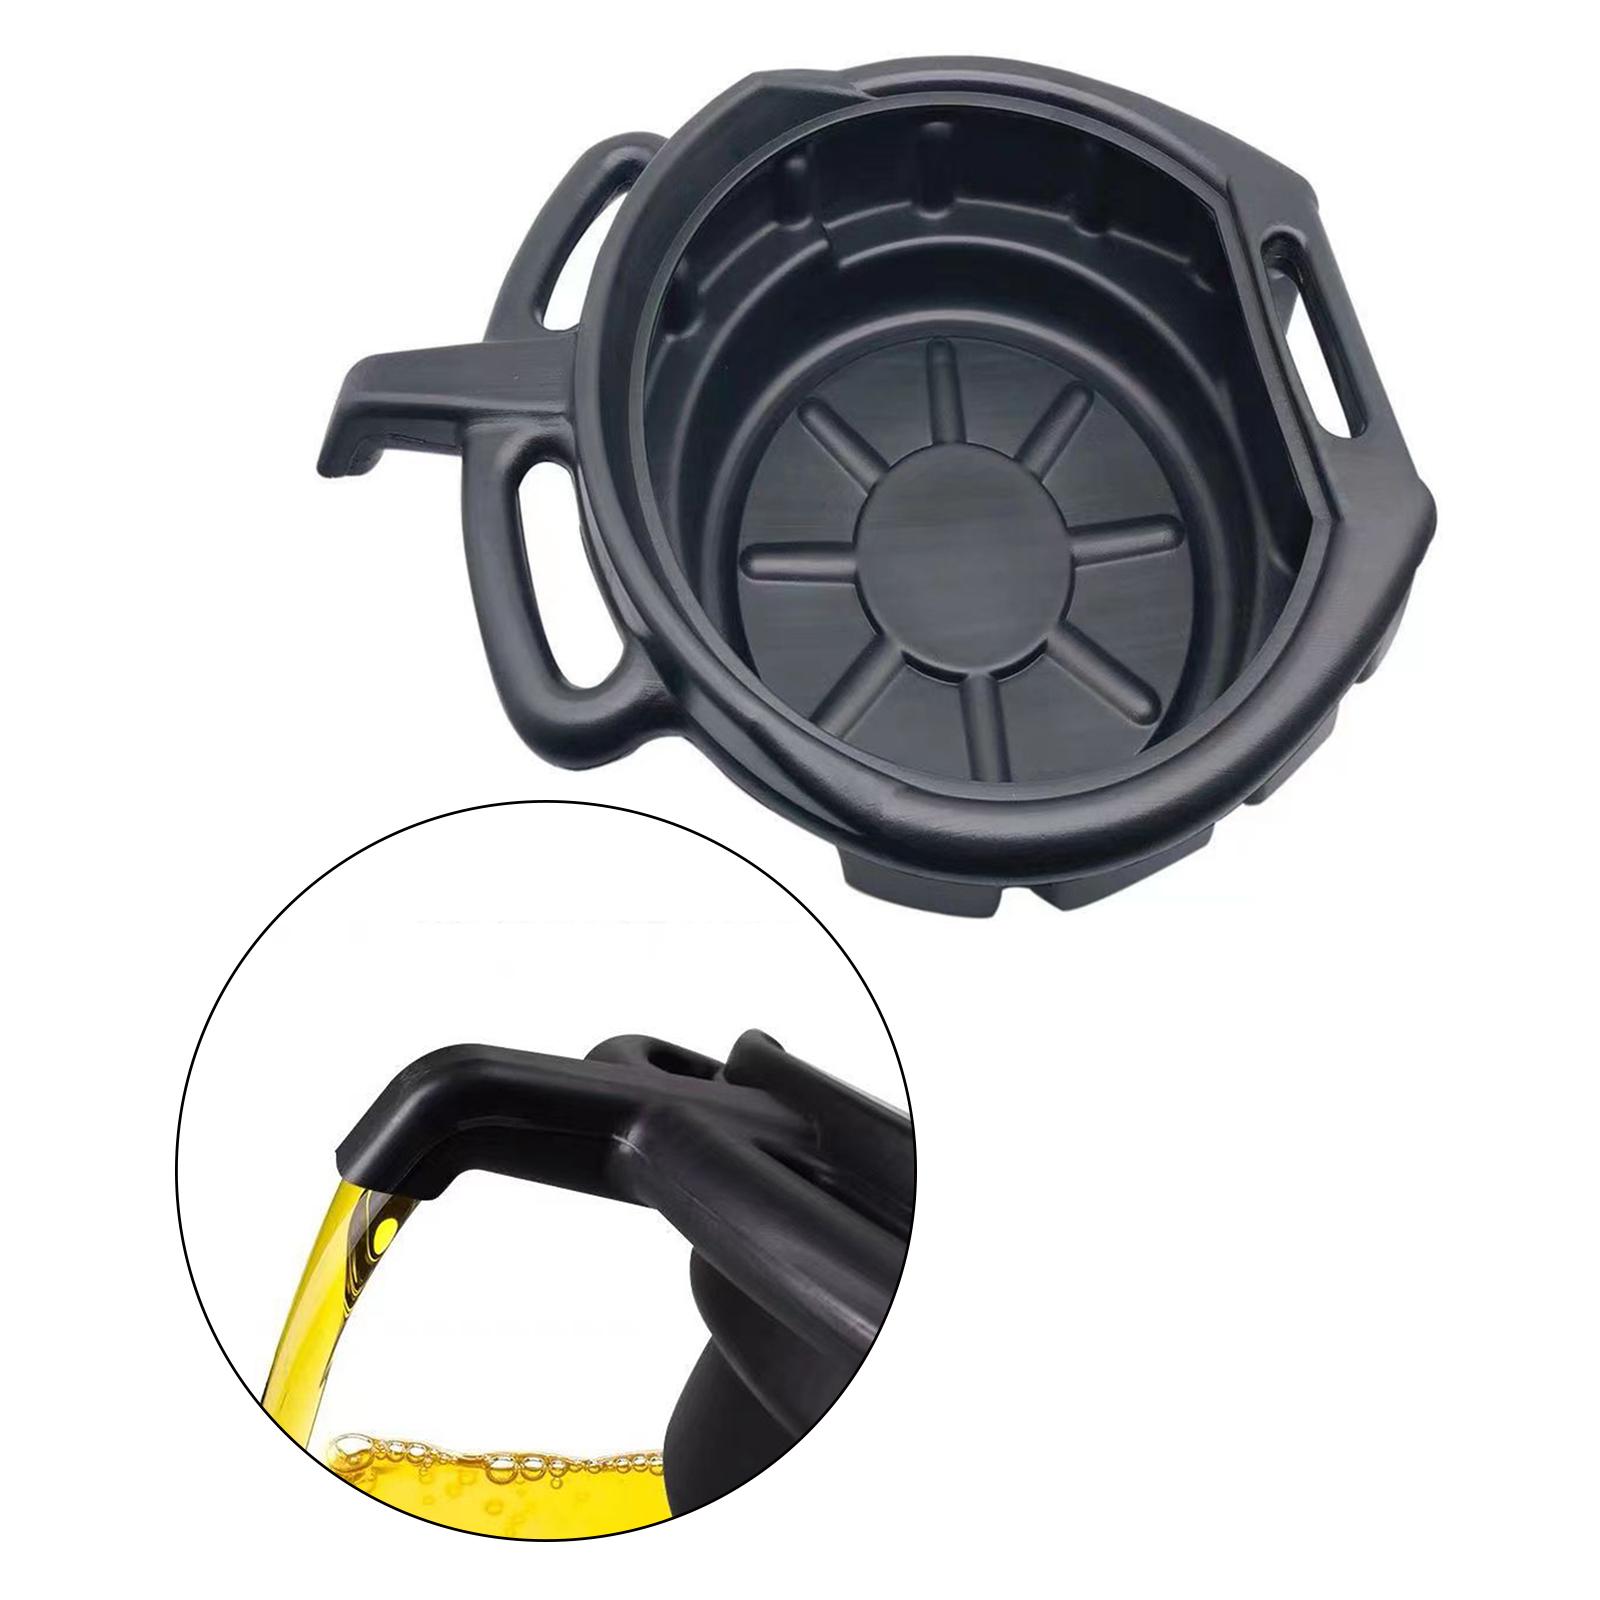 Oil Fuel Coolant Can Leak Drain Pan for Garage Tool Truck Garage